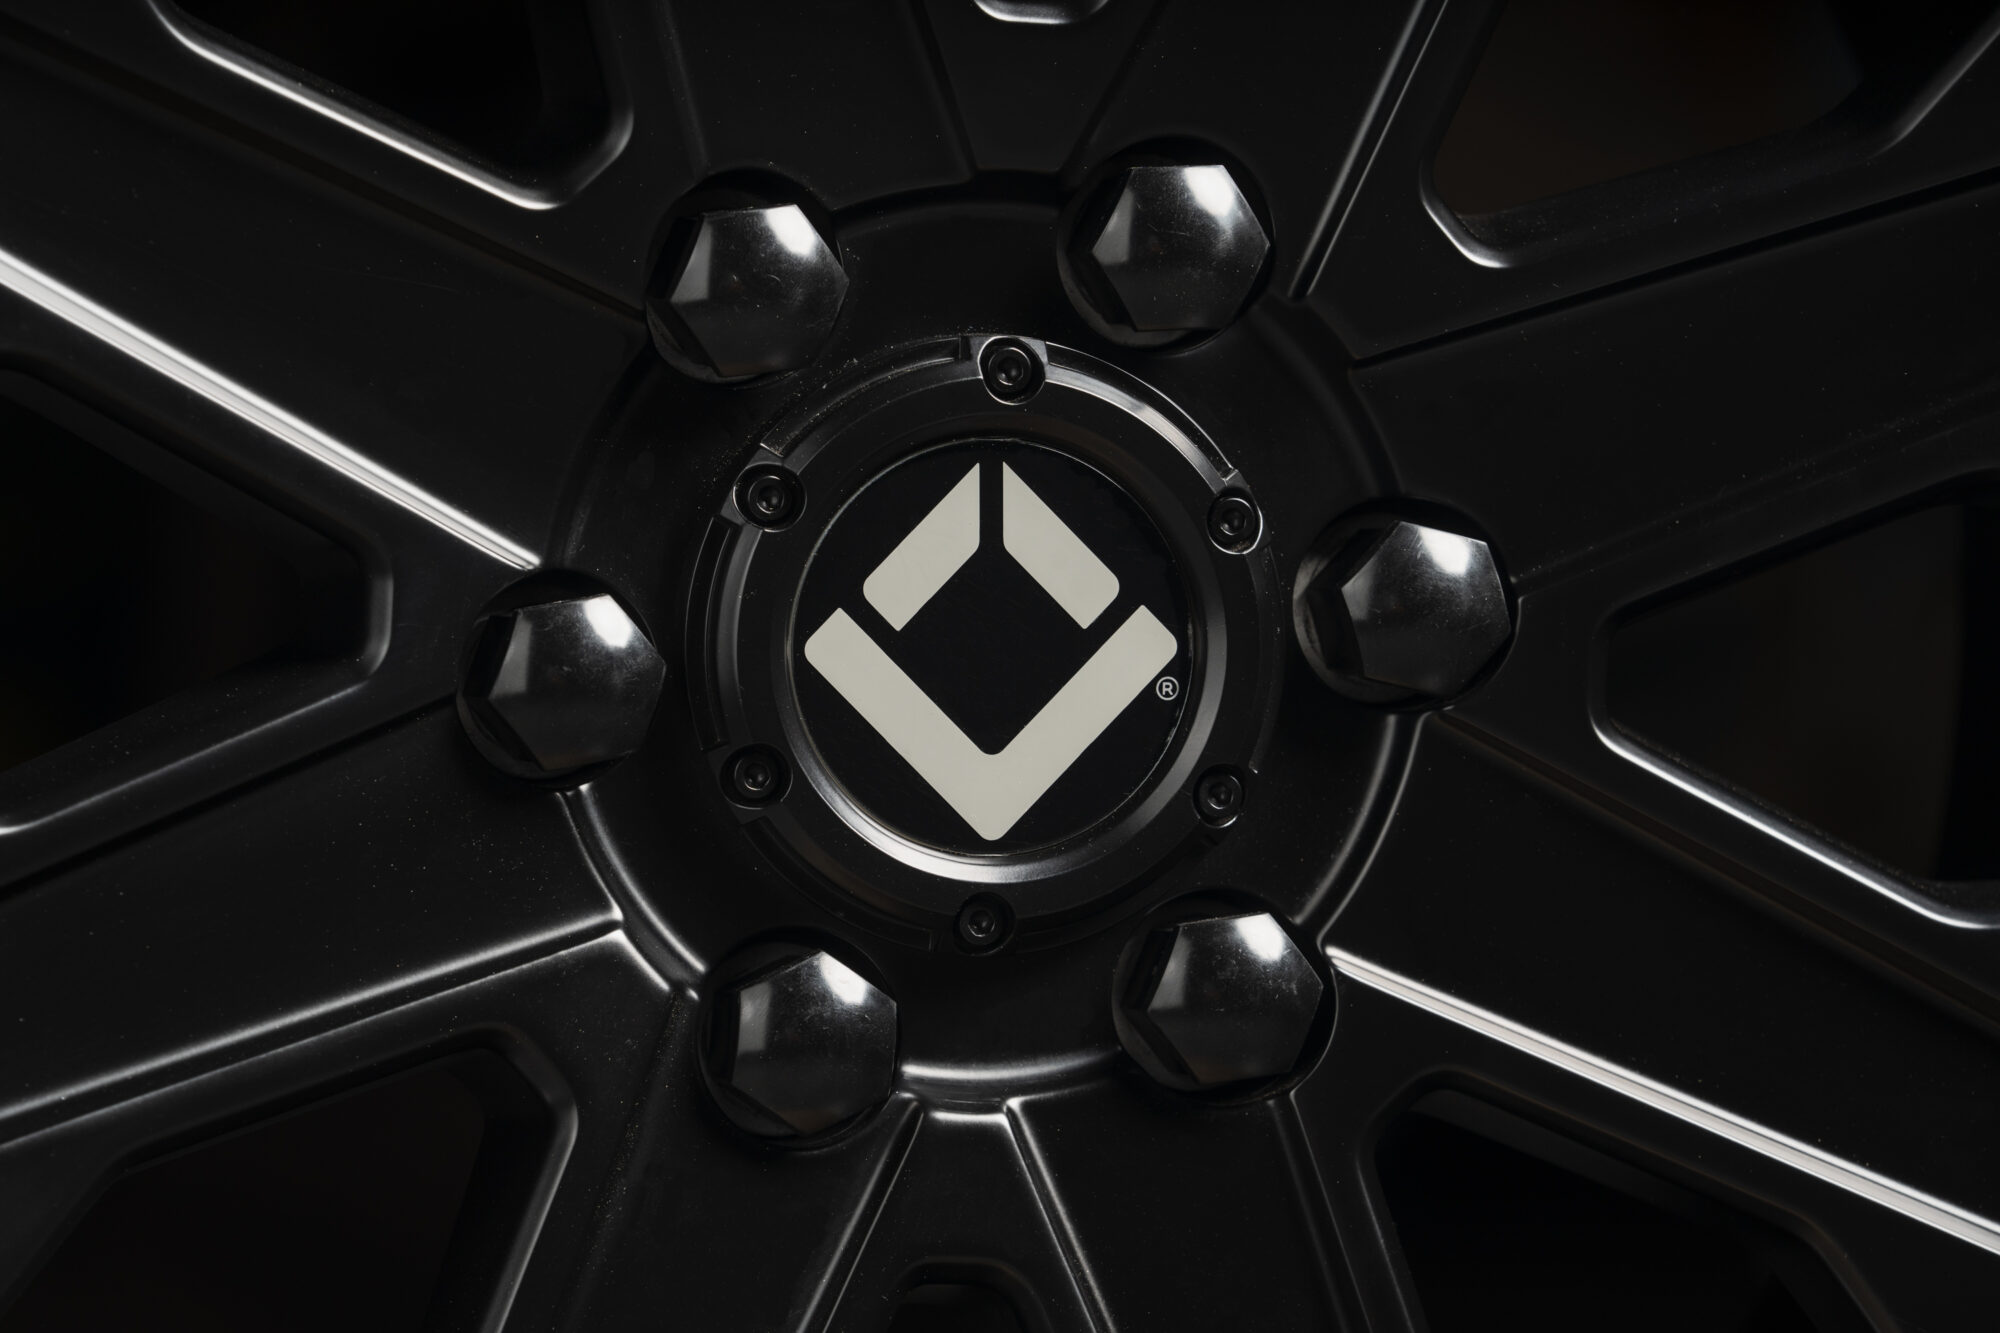 The center hub cap with a Outside Van emblem